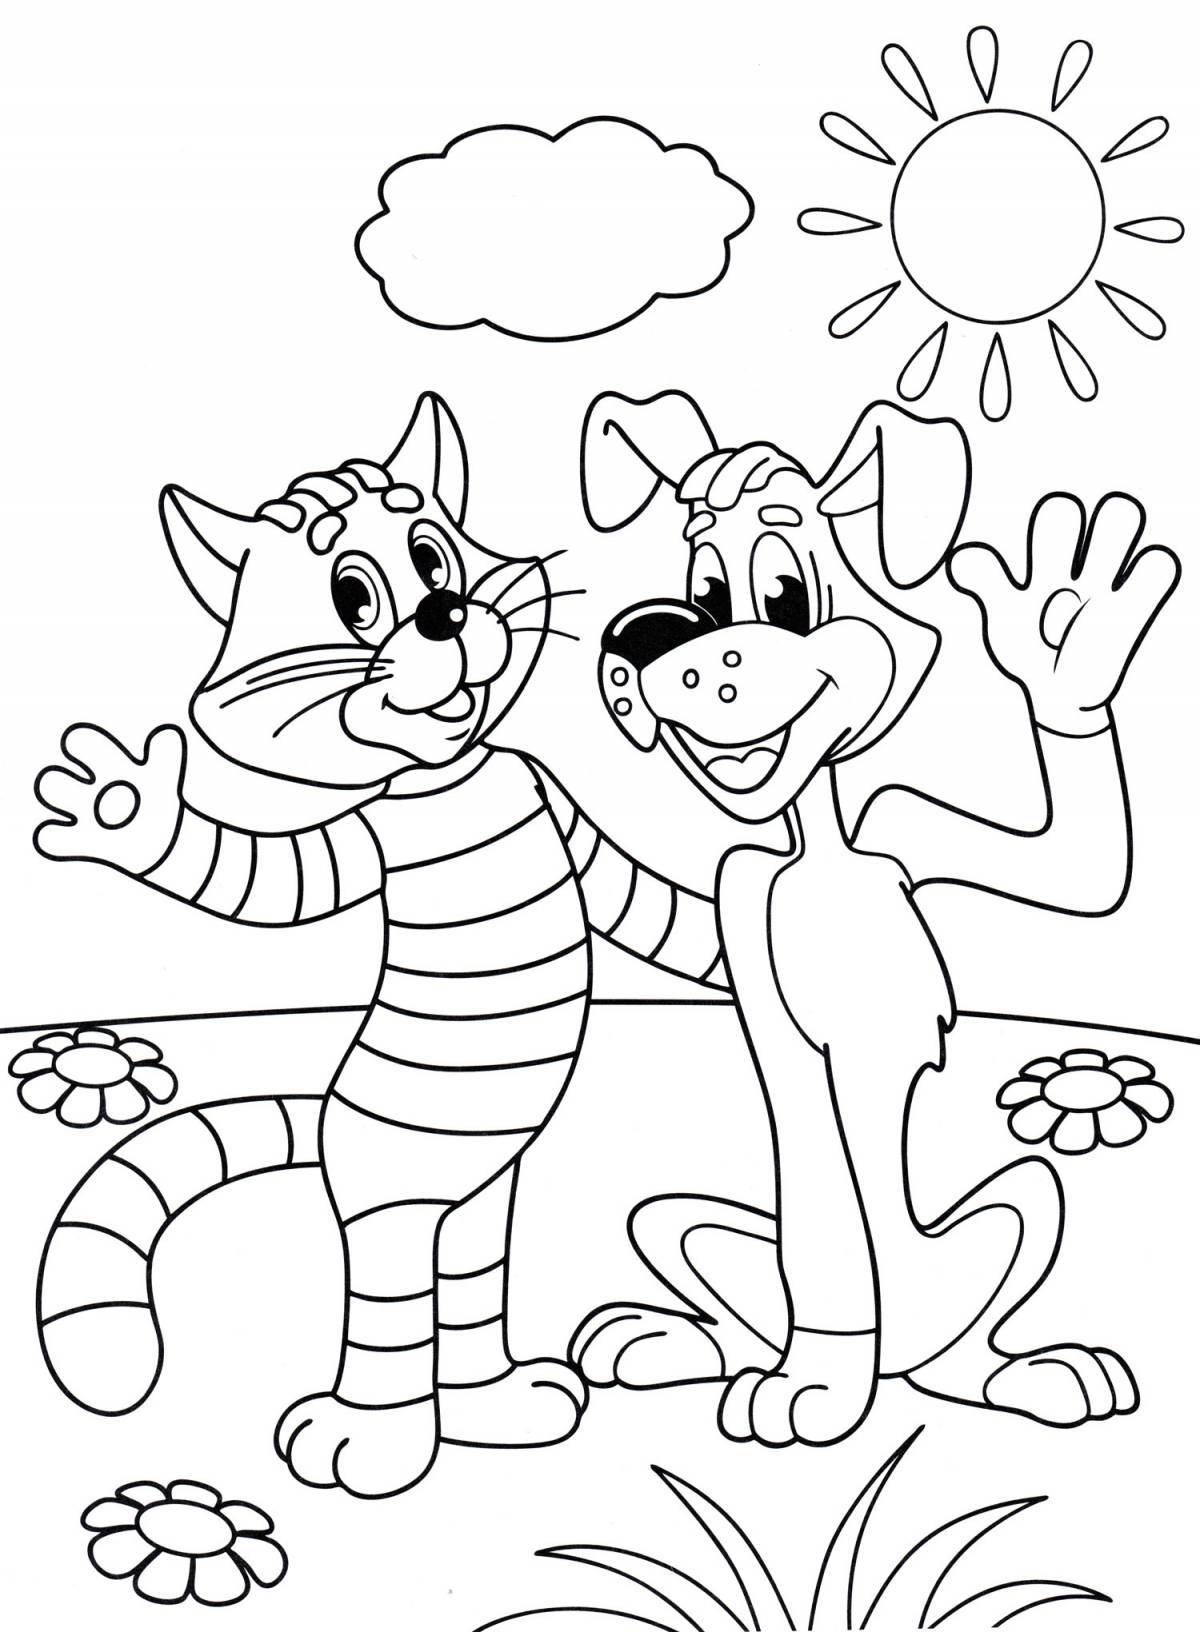 Exciting buttermilk coloring book for kids